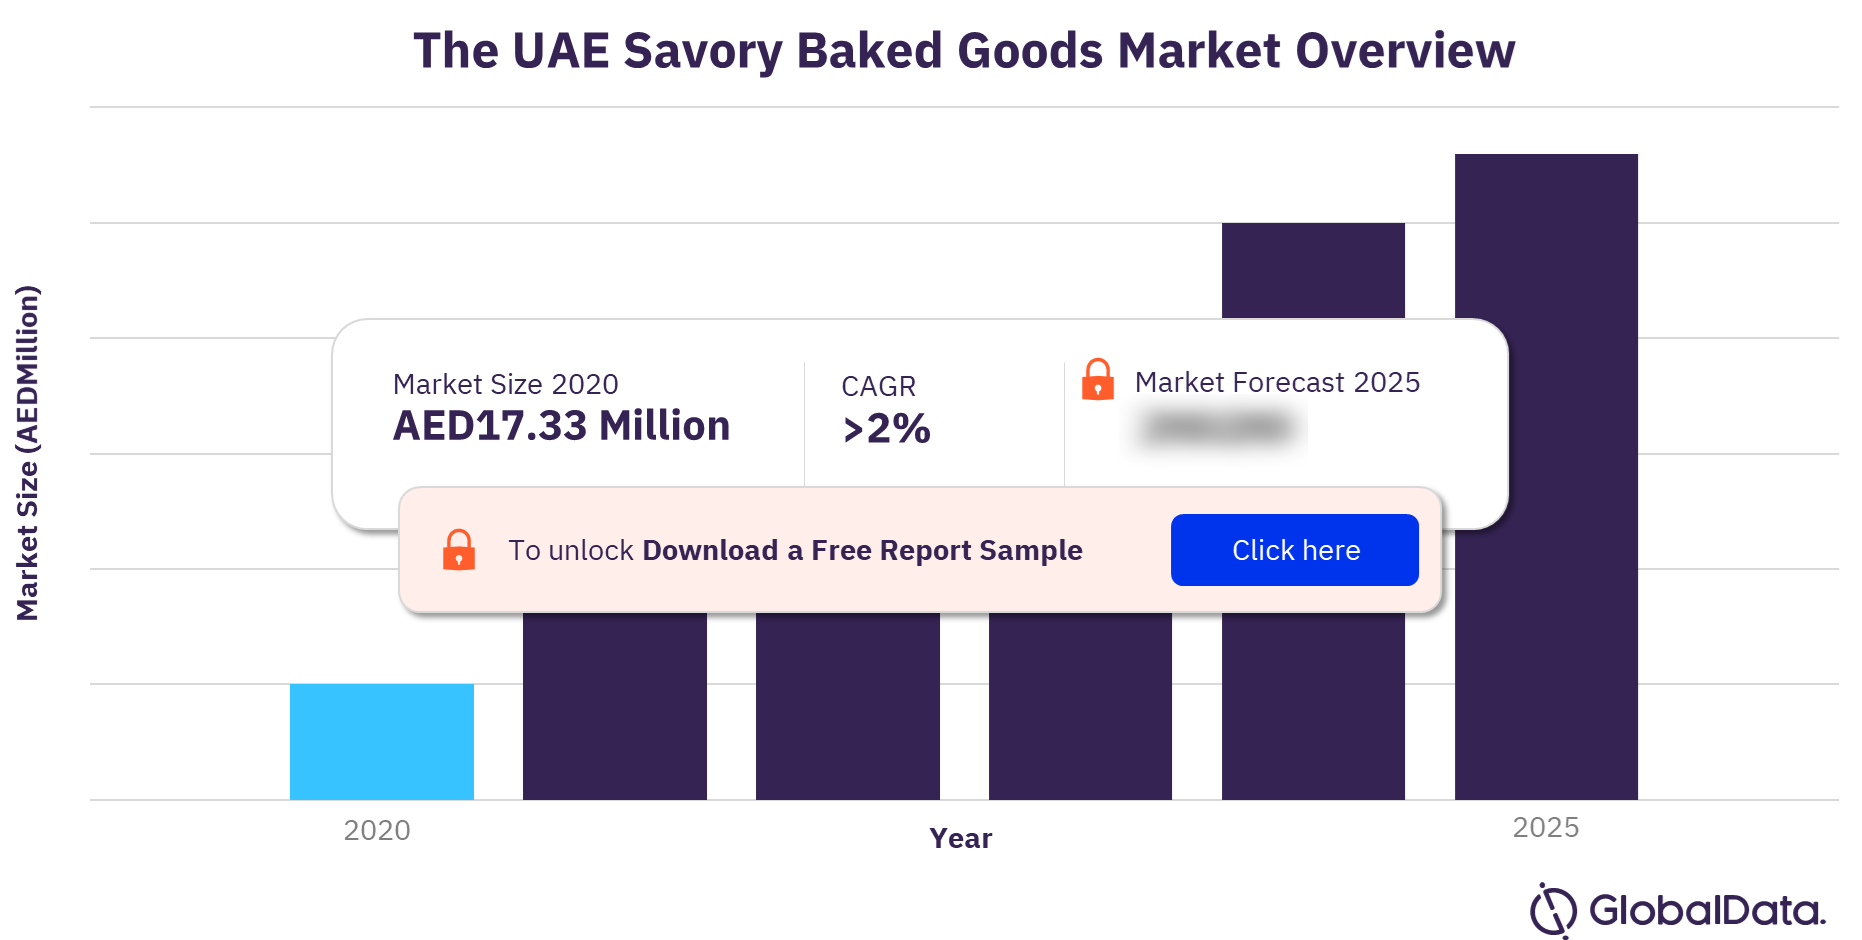 UAE savory baked goods market overview 